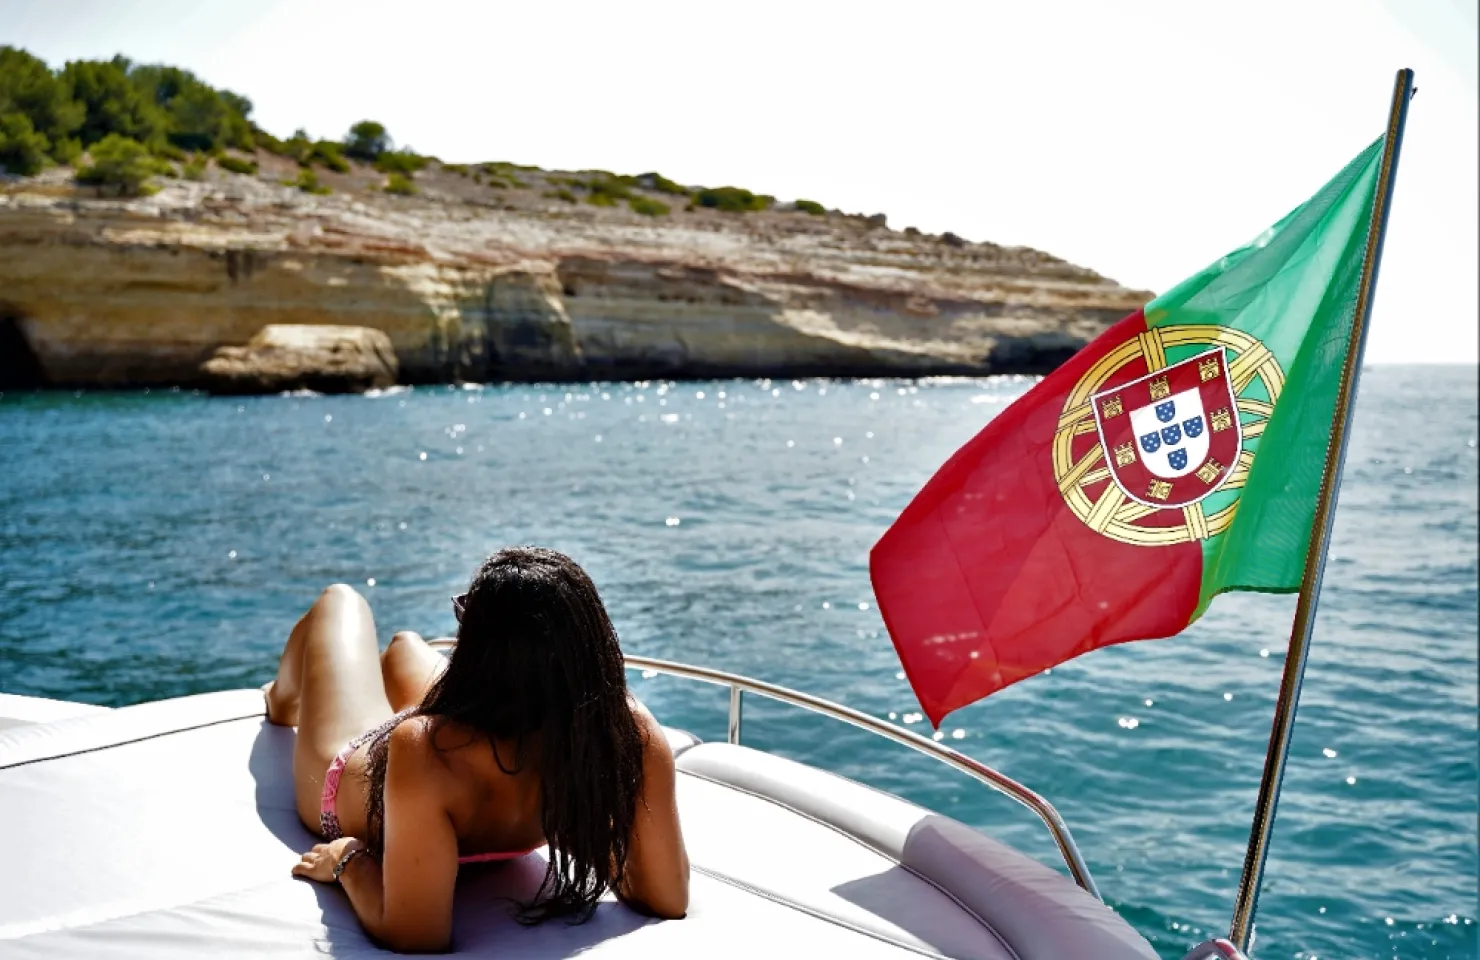 Full Day Luxury Yacht Charter - Yacht Charters in the Algarve. 